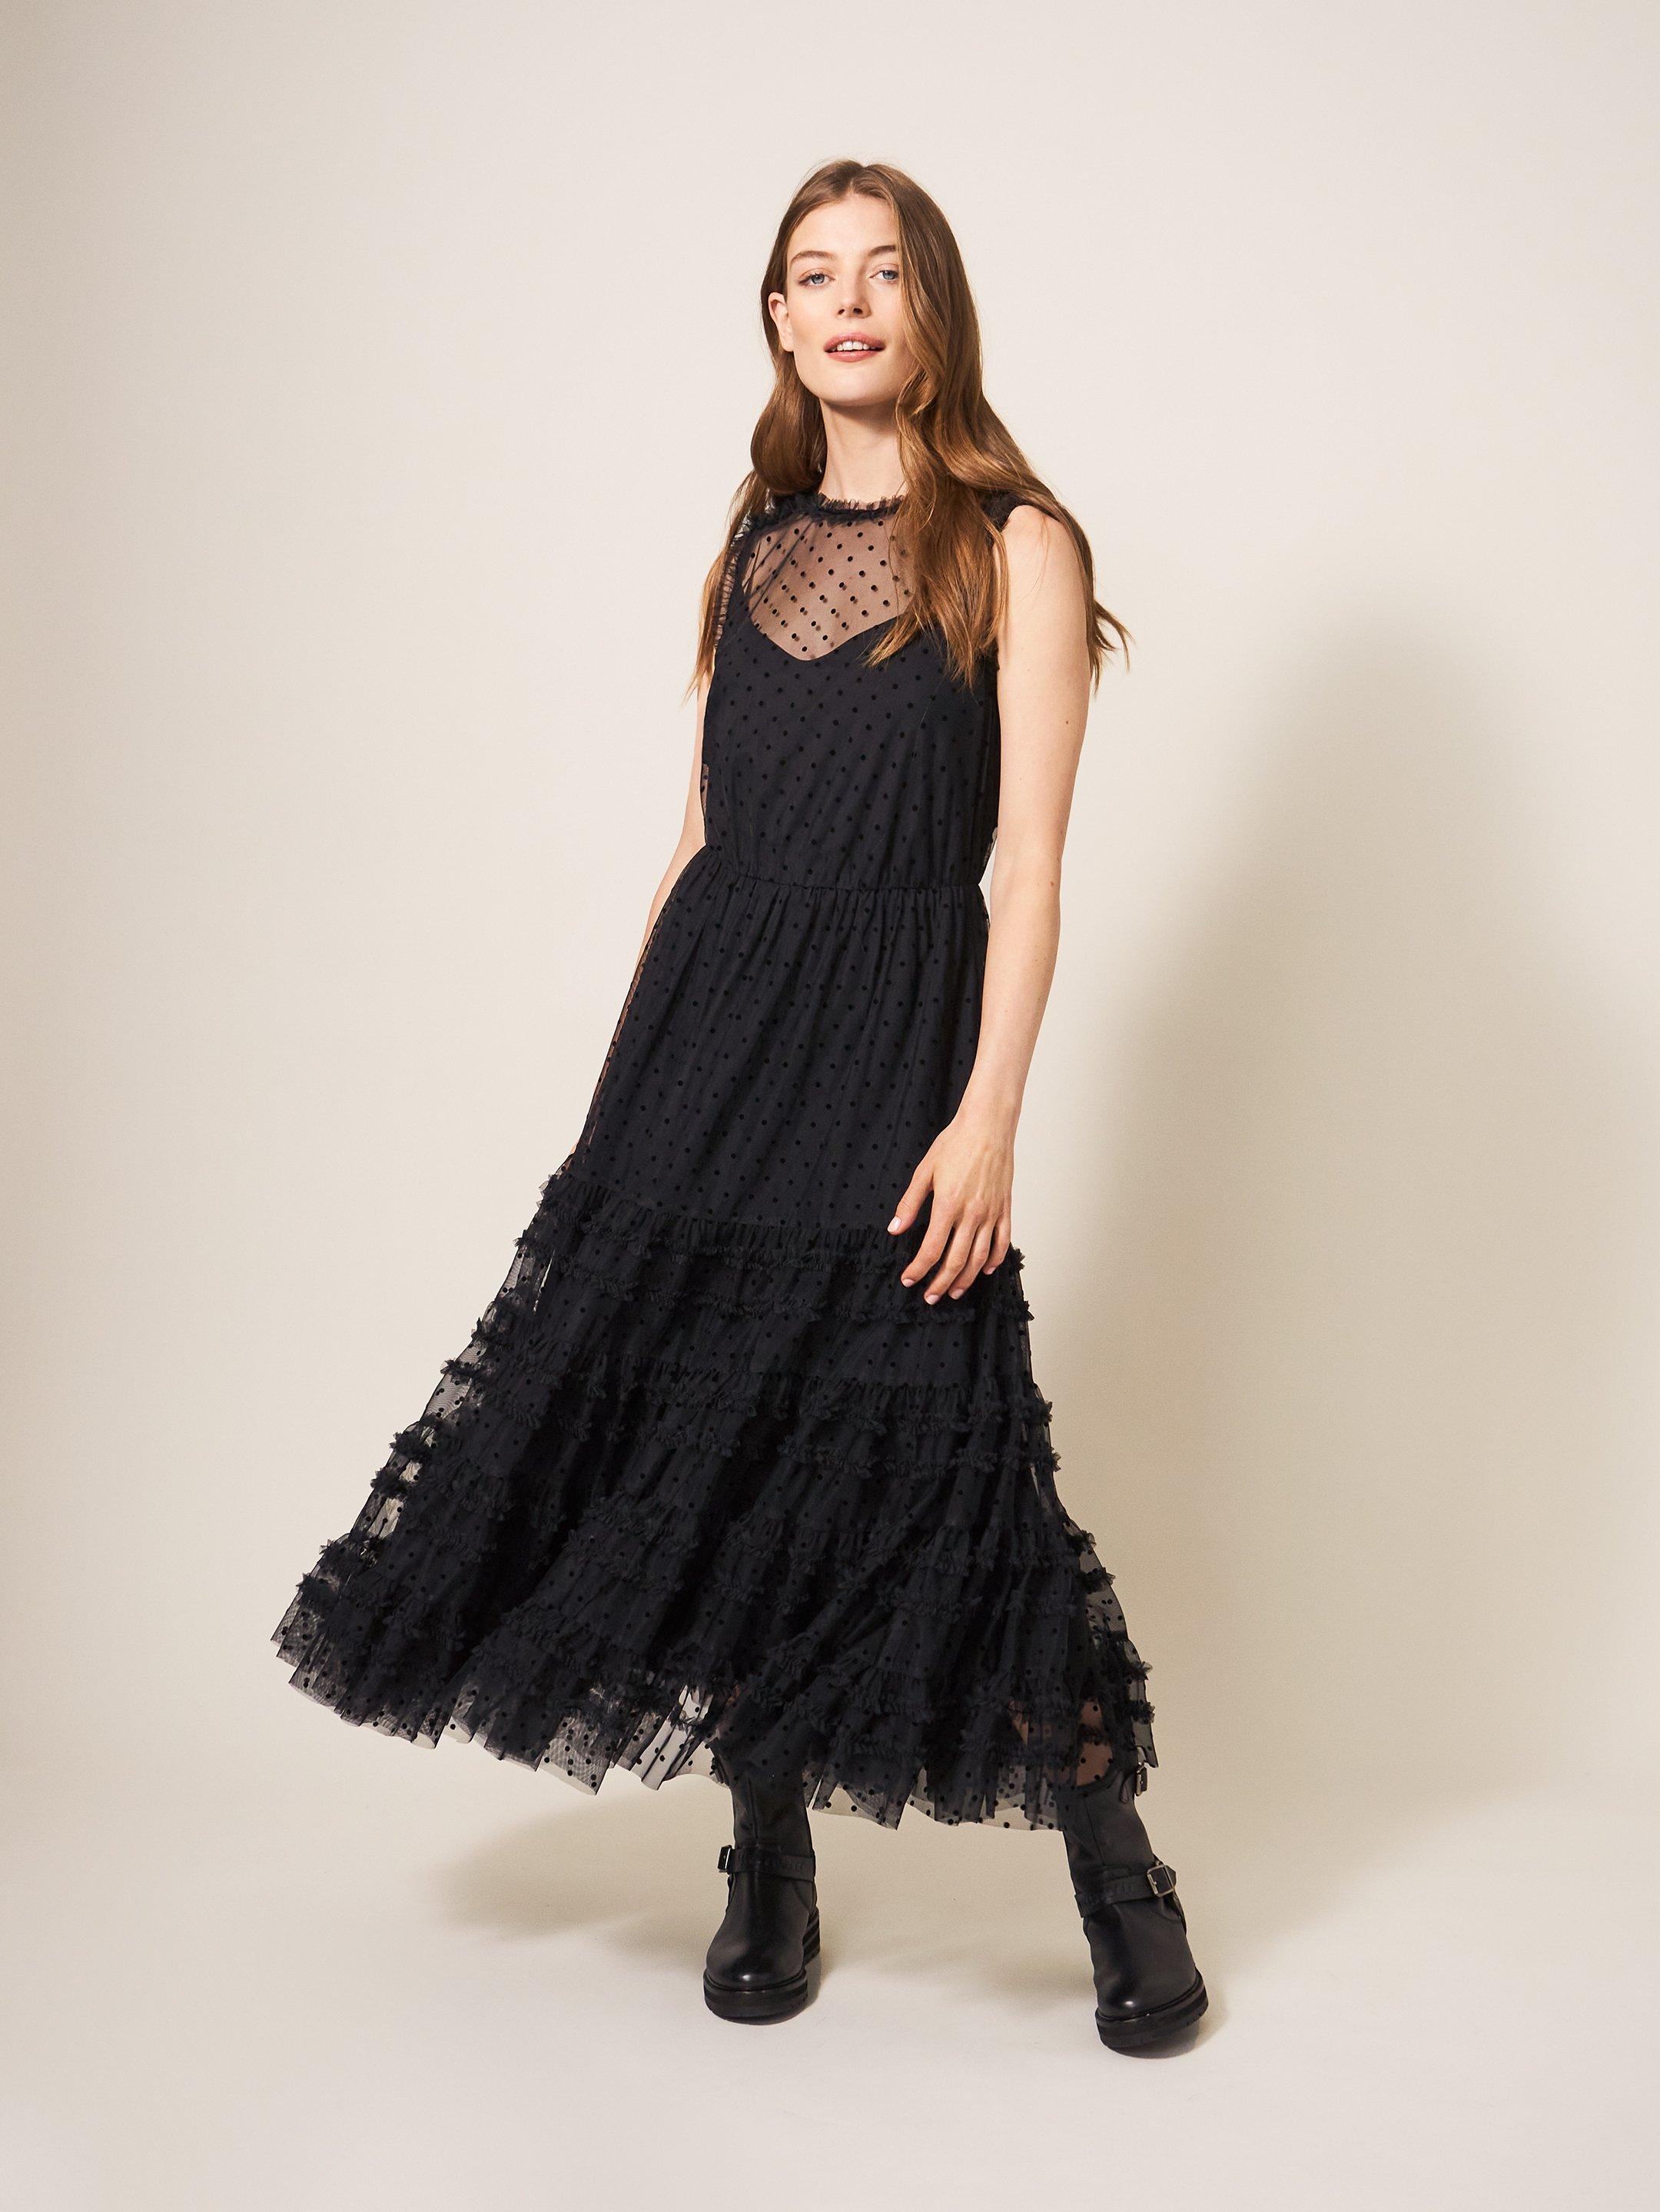 Hiral Flock Spot Tulle Dress in PURE BLK - MODEL DETAIL